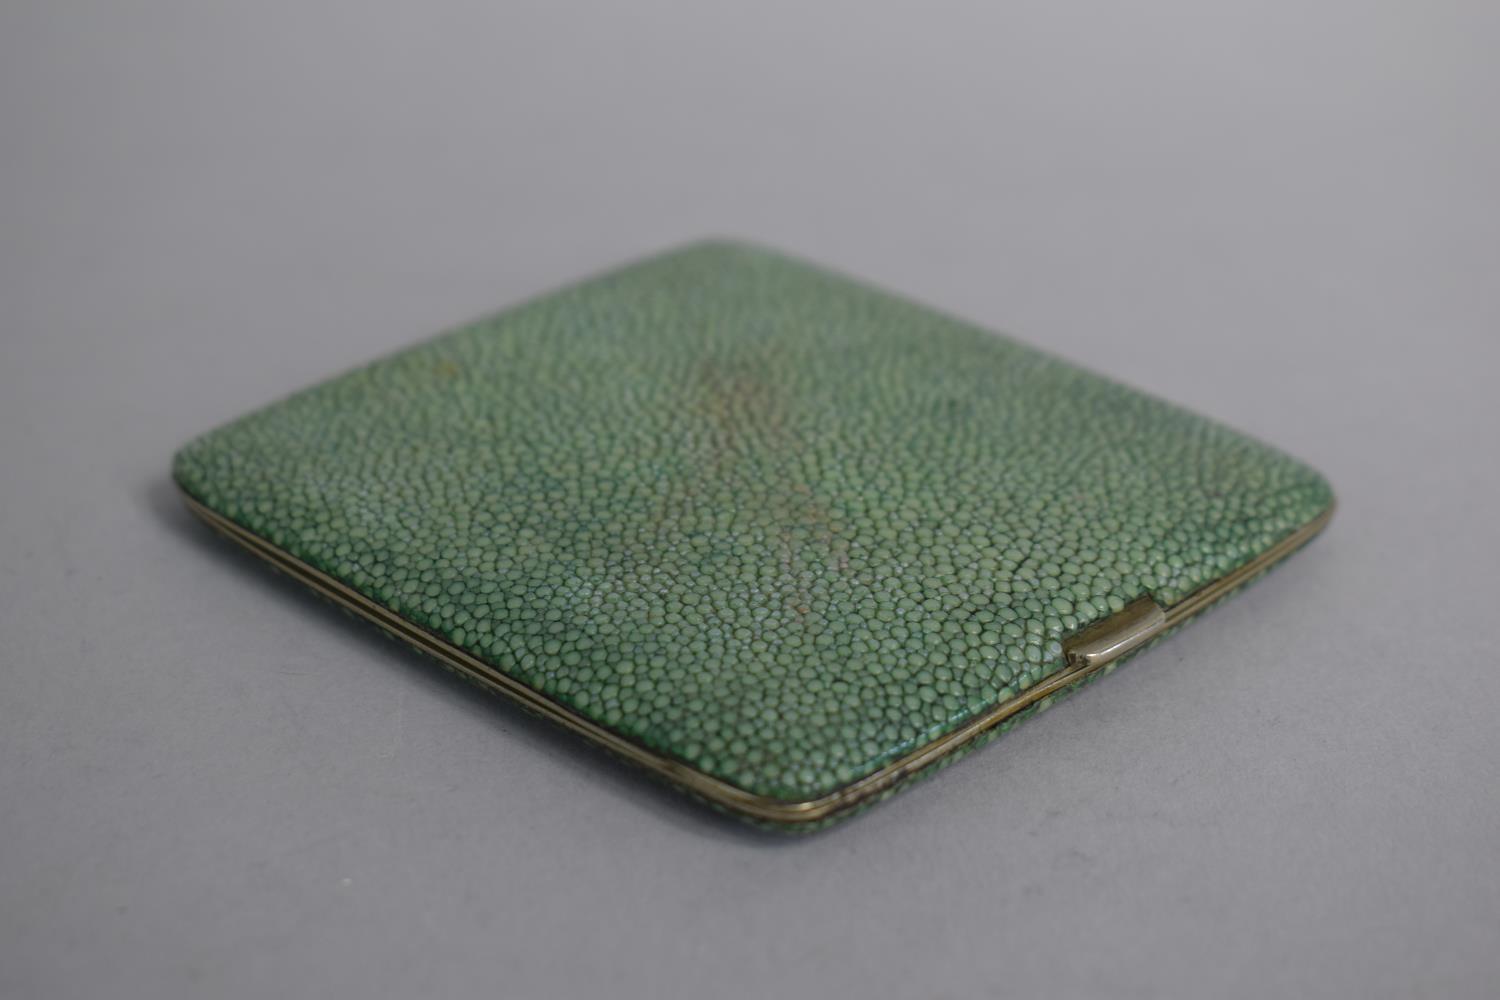 An Edwardian Shagreen Covered Cigarette Case Stamped 'Made in England'